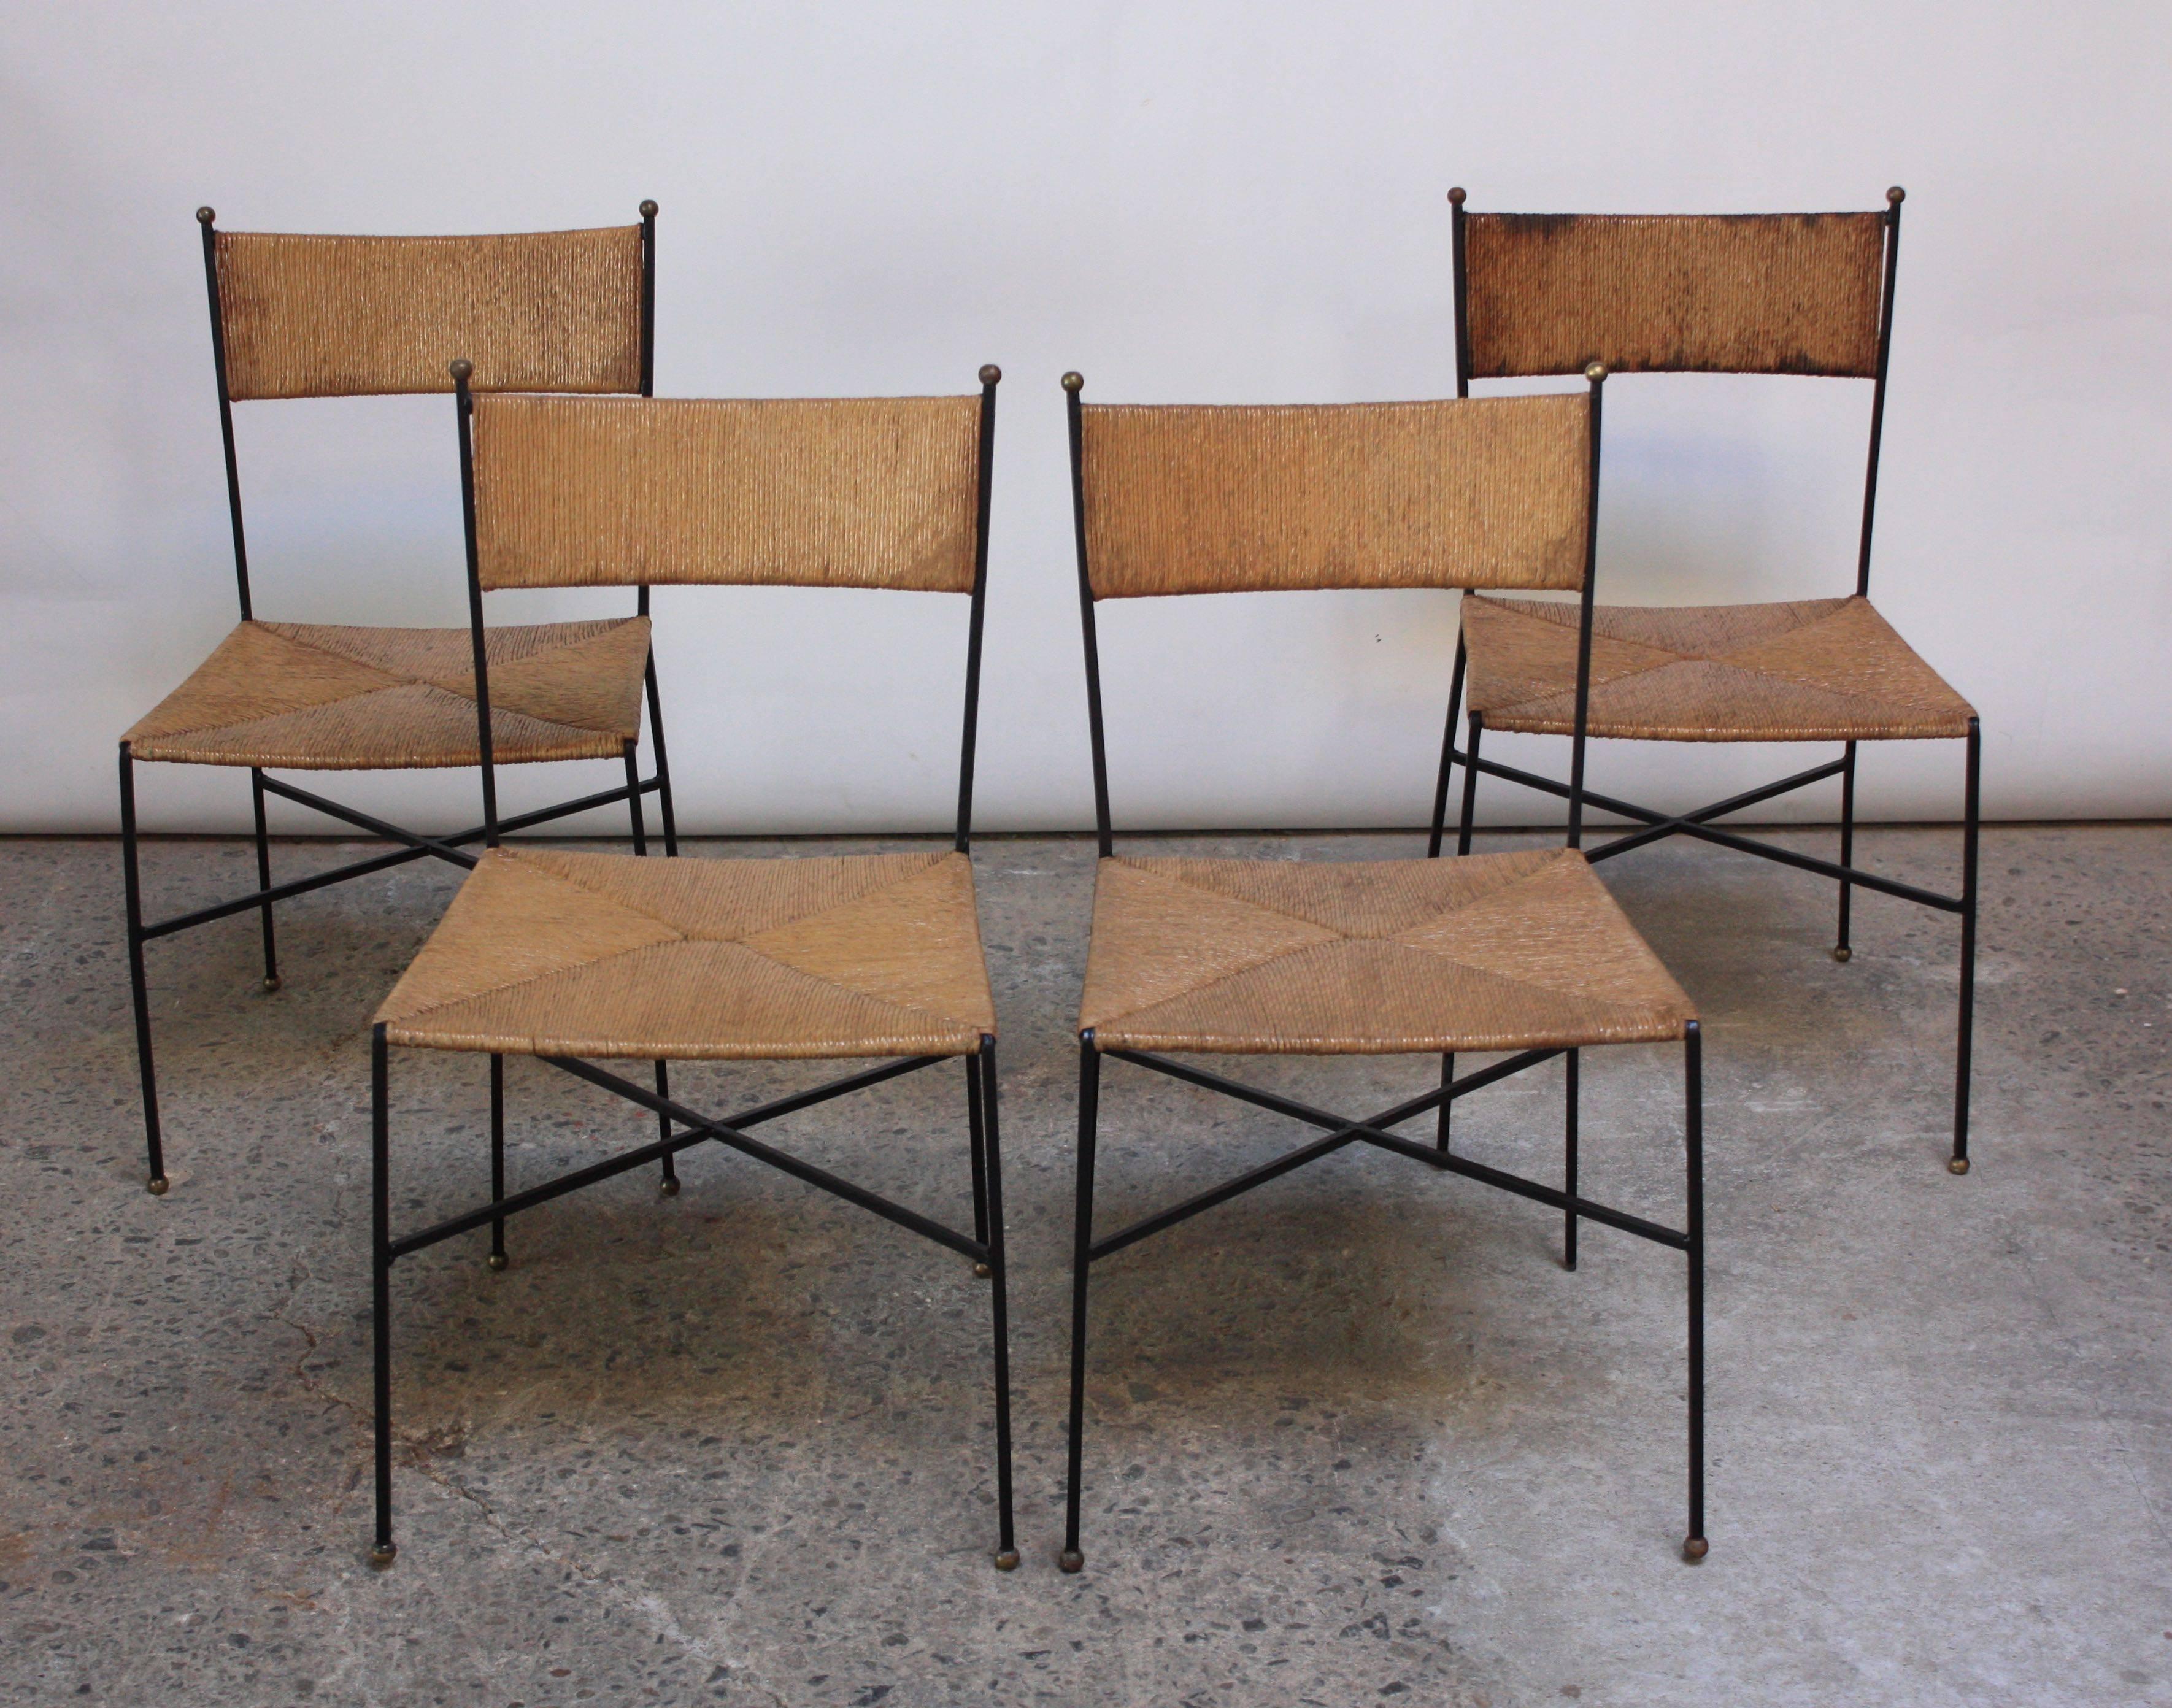 These Milo Baughman chairs were designed in 1954 for Murray Furniture and feature a rush back and set, iron frame, and brass finials (six to a chair). These chairs are uncommon and difficult to find, particularly as a set of four. They are suited